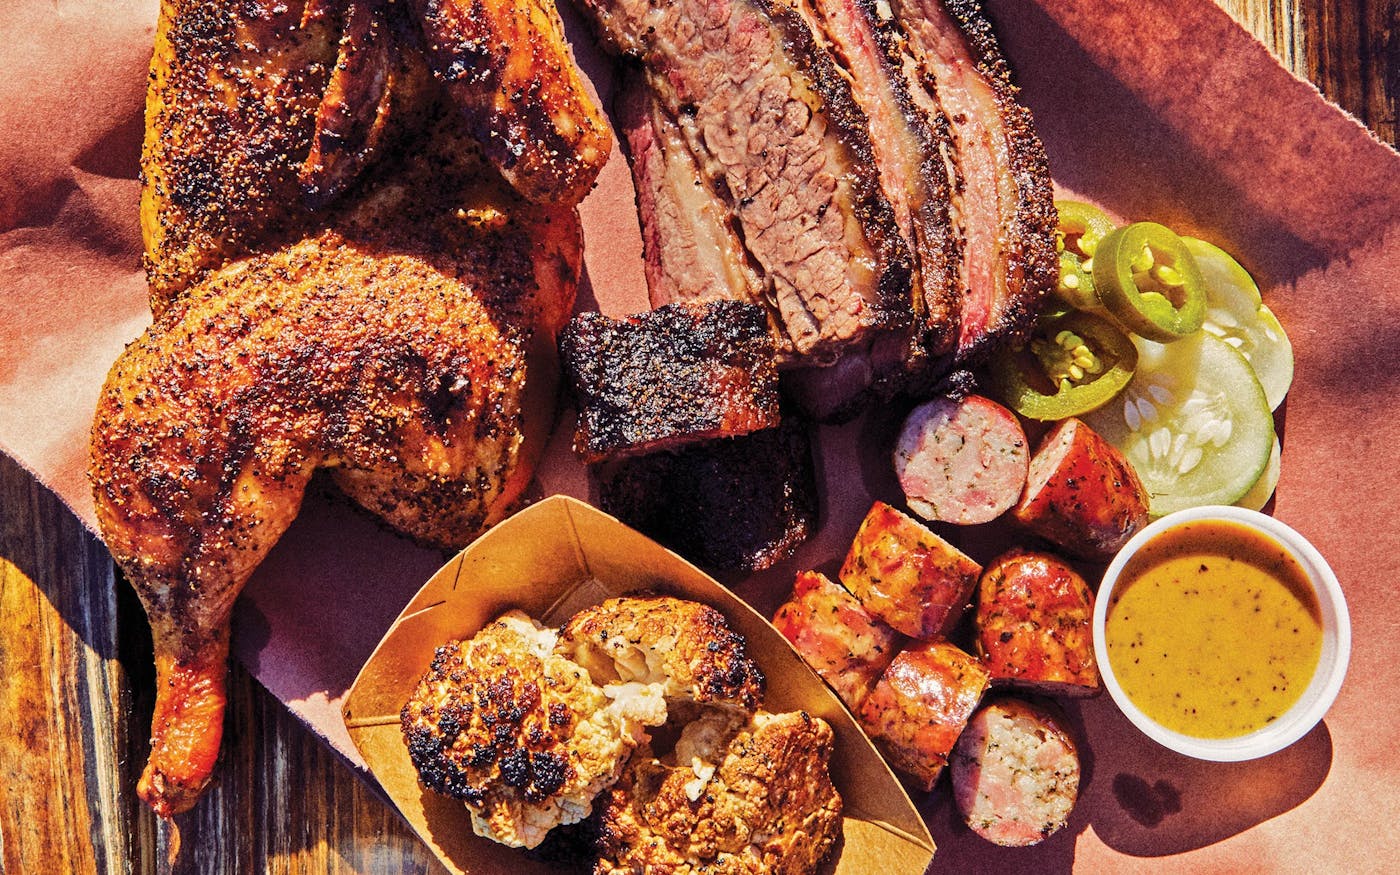 https://img.texasmonthly.com/2021/10/top-50-bbq-joints-list-feature.jpg?auto=compress&crop=faces&fit=crop&fm=jpg&h=1050&ixlib=php-3.3.1&q=45&w=1400